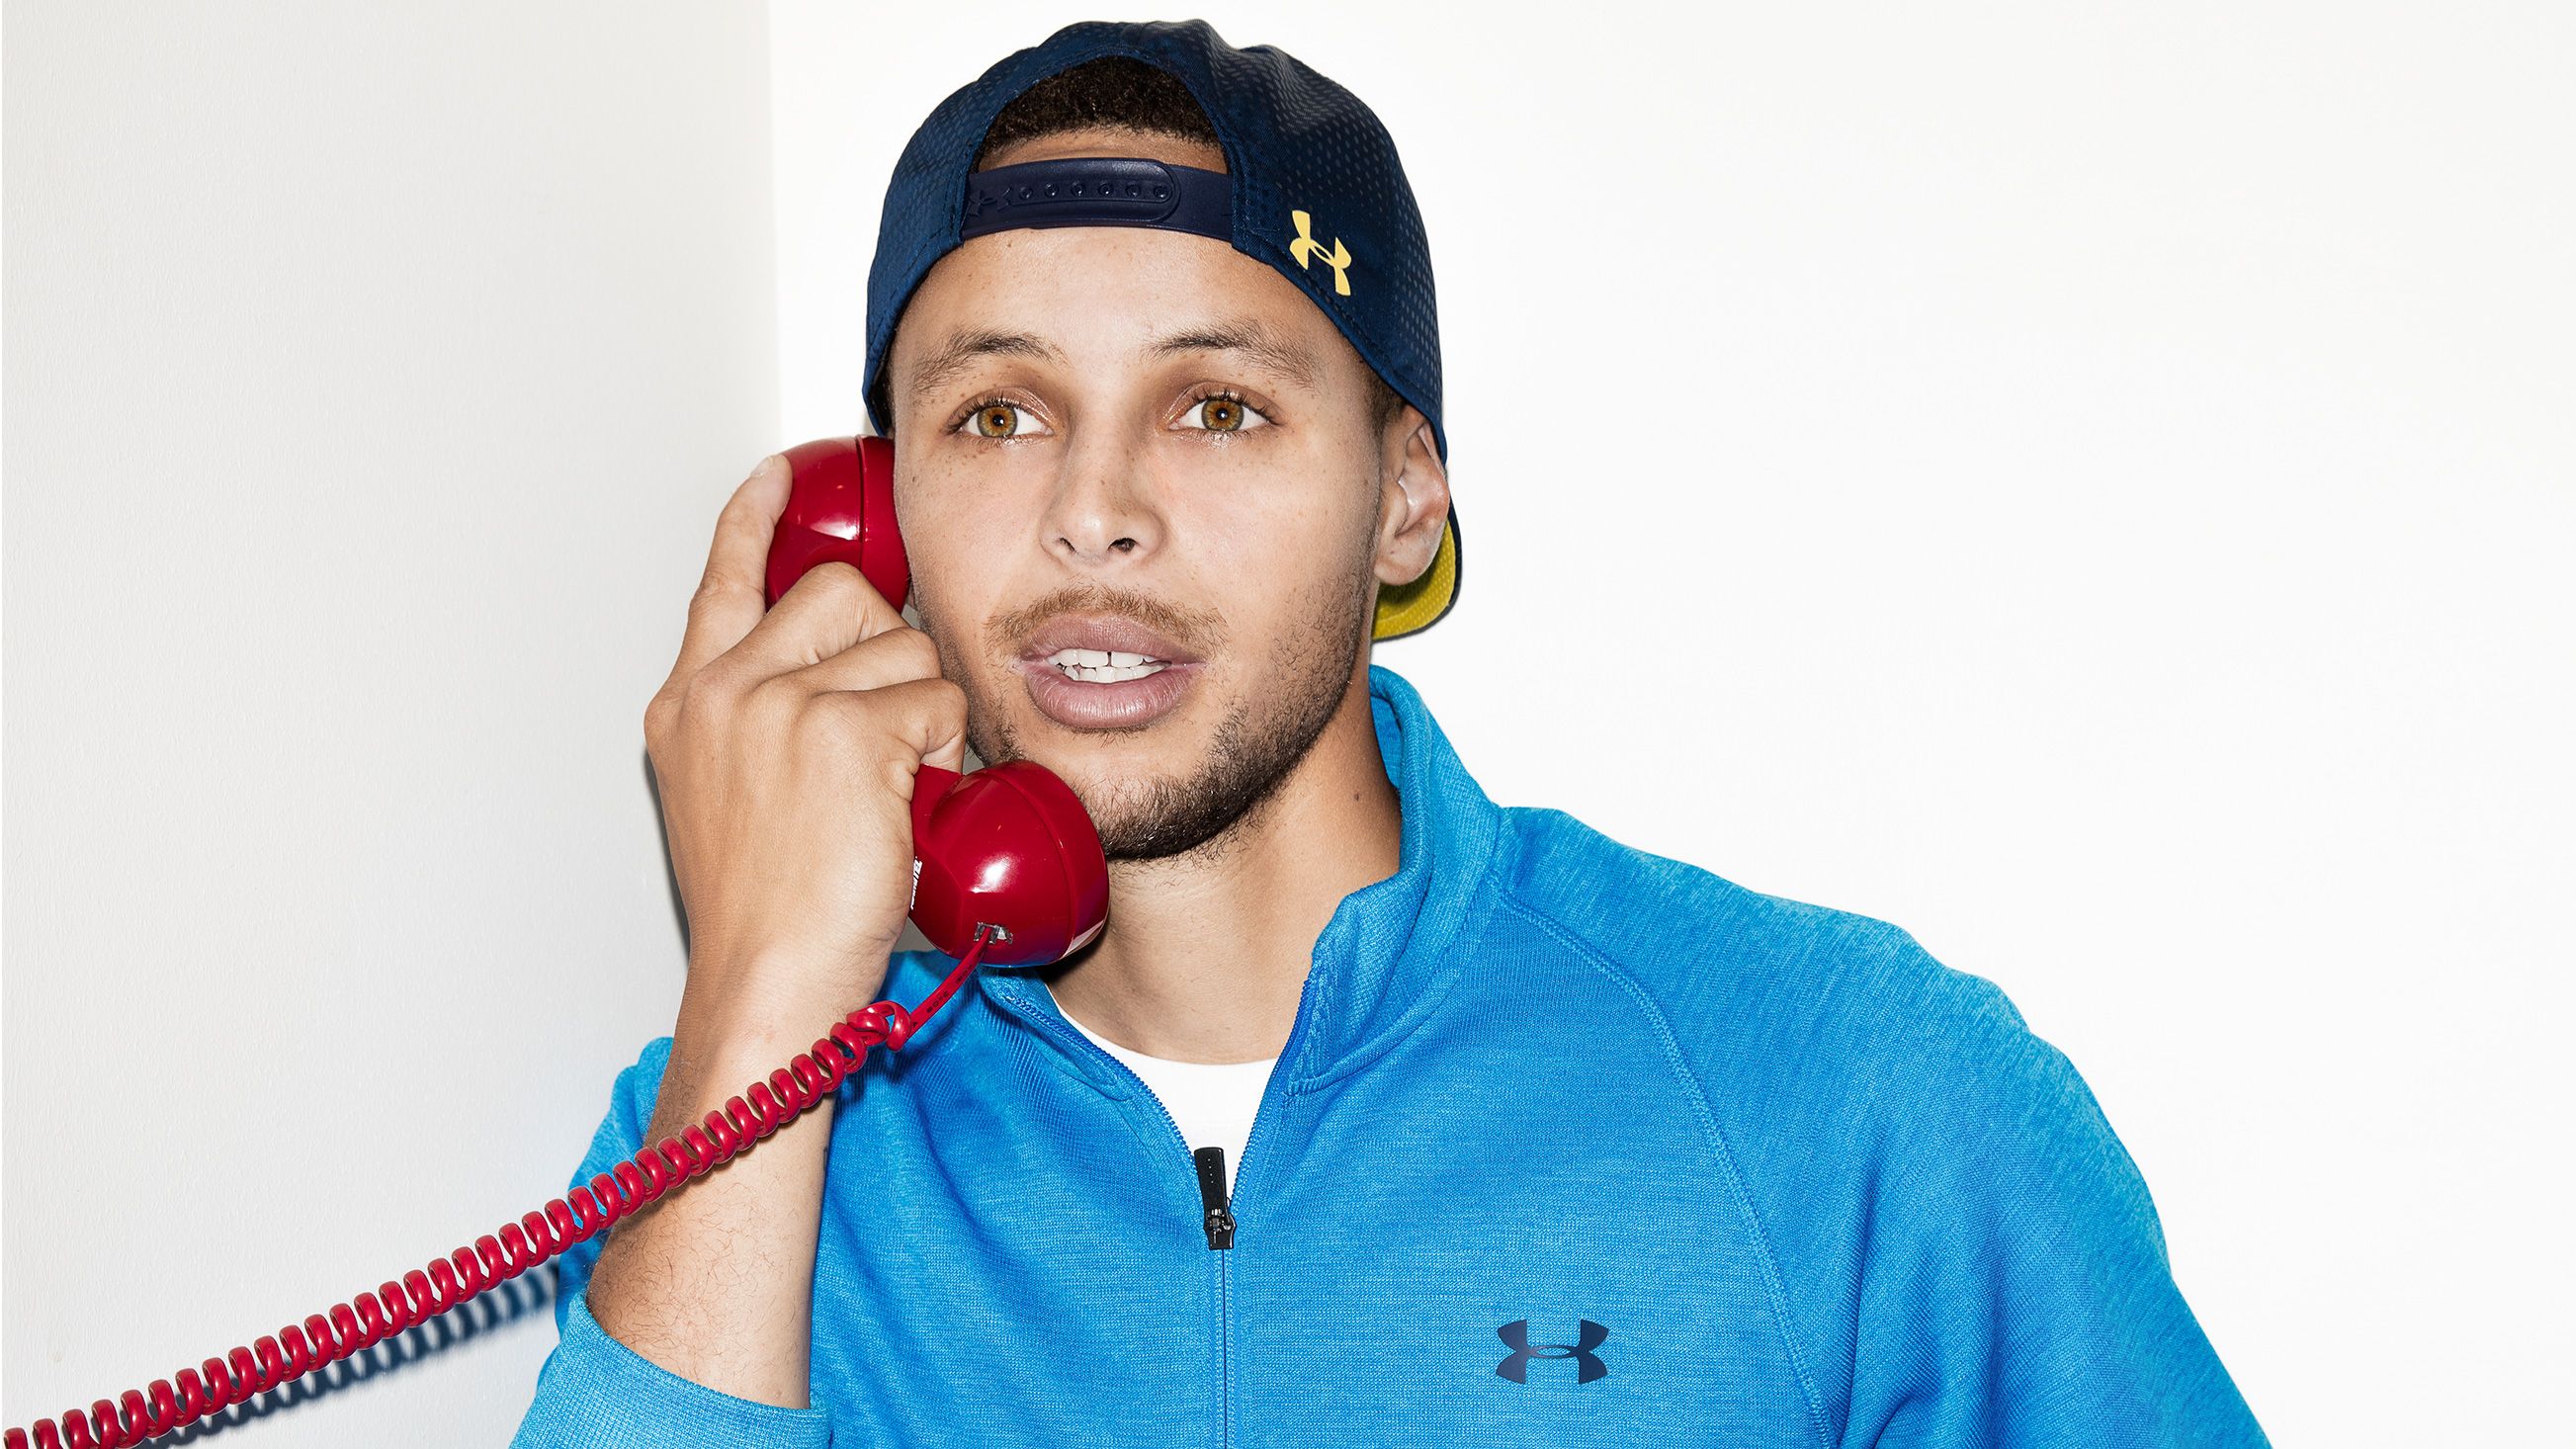 Stephen Curry Hat: Style, Substance, and Sporting Fandom